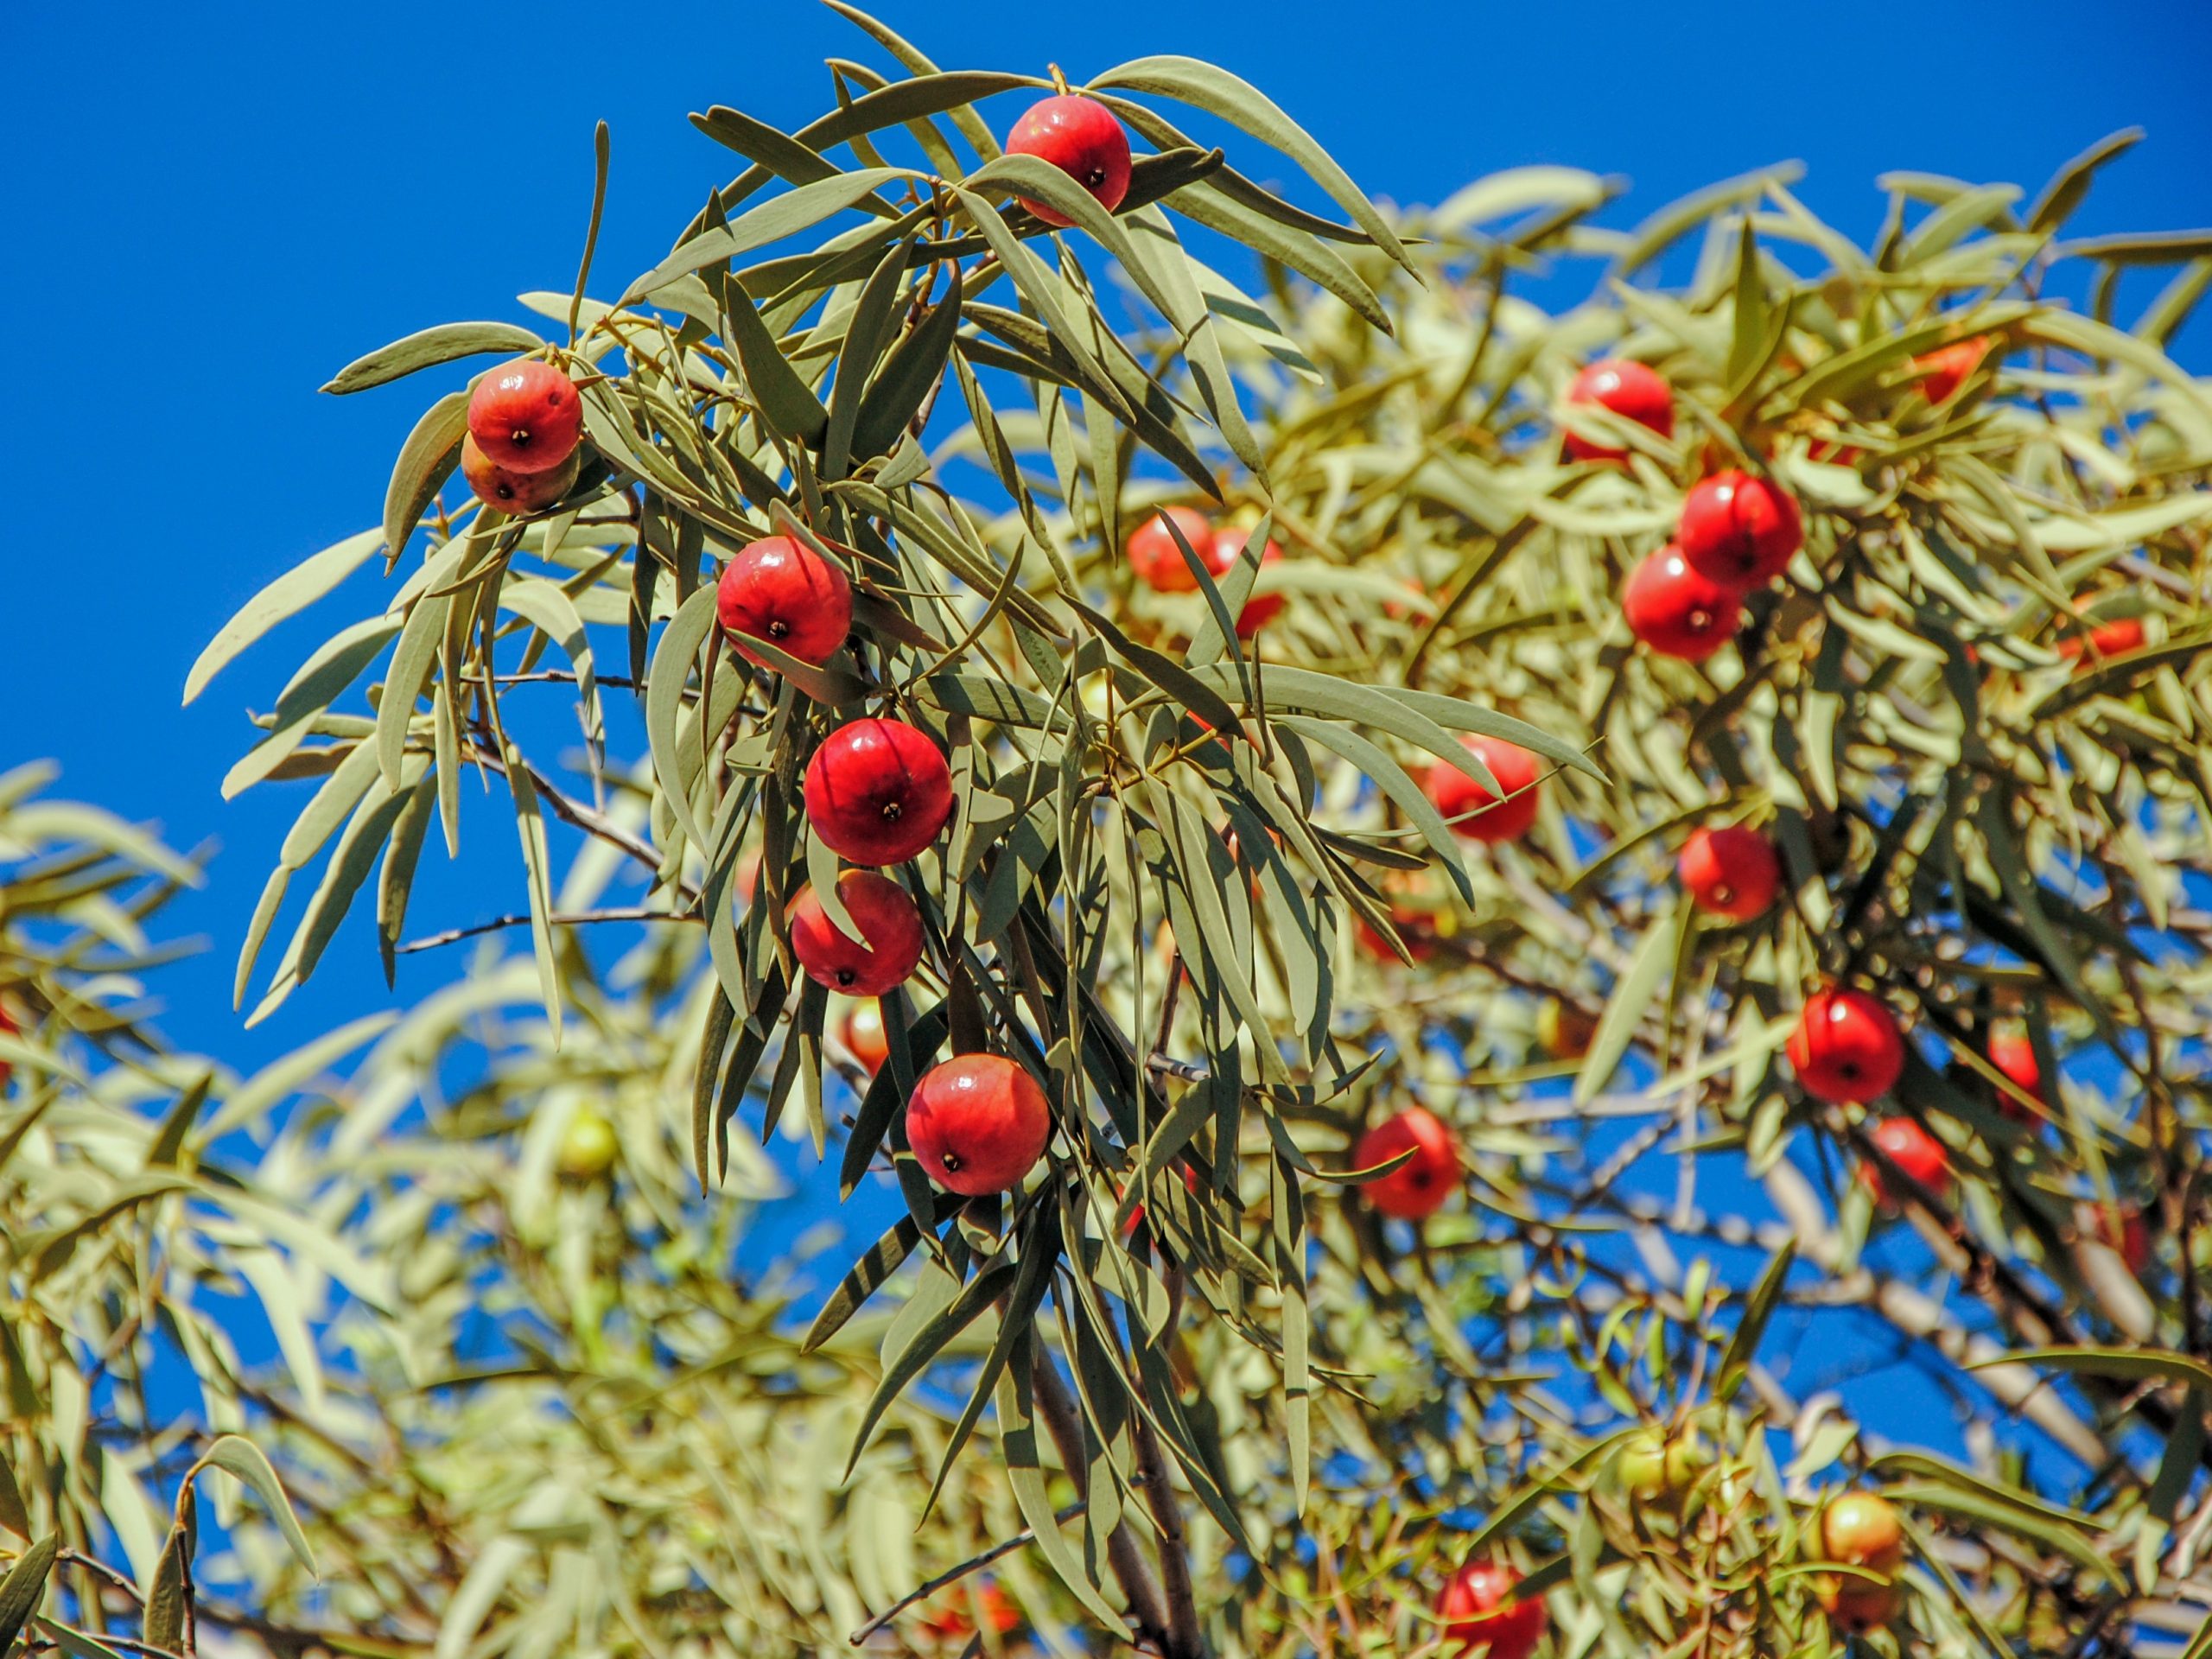 Indigenous communities now have a tool enabling them to assess the quality and sweetness of their wild-harvested native bush fruits in the field, rather than sending samples off to food science laboratories.